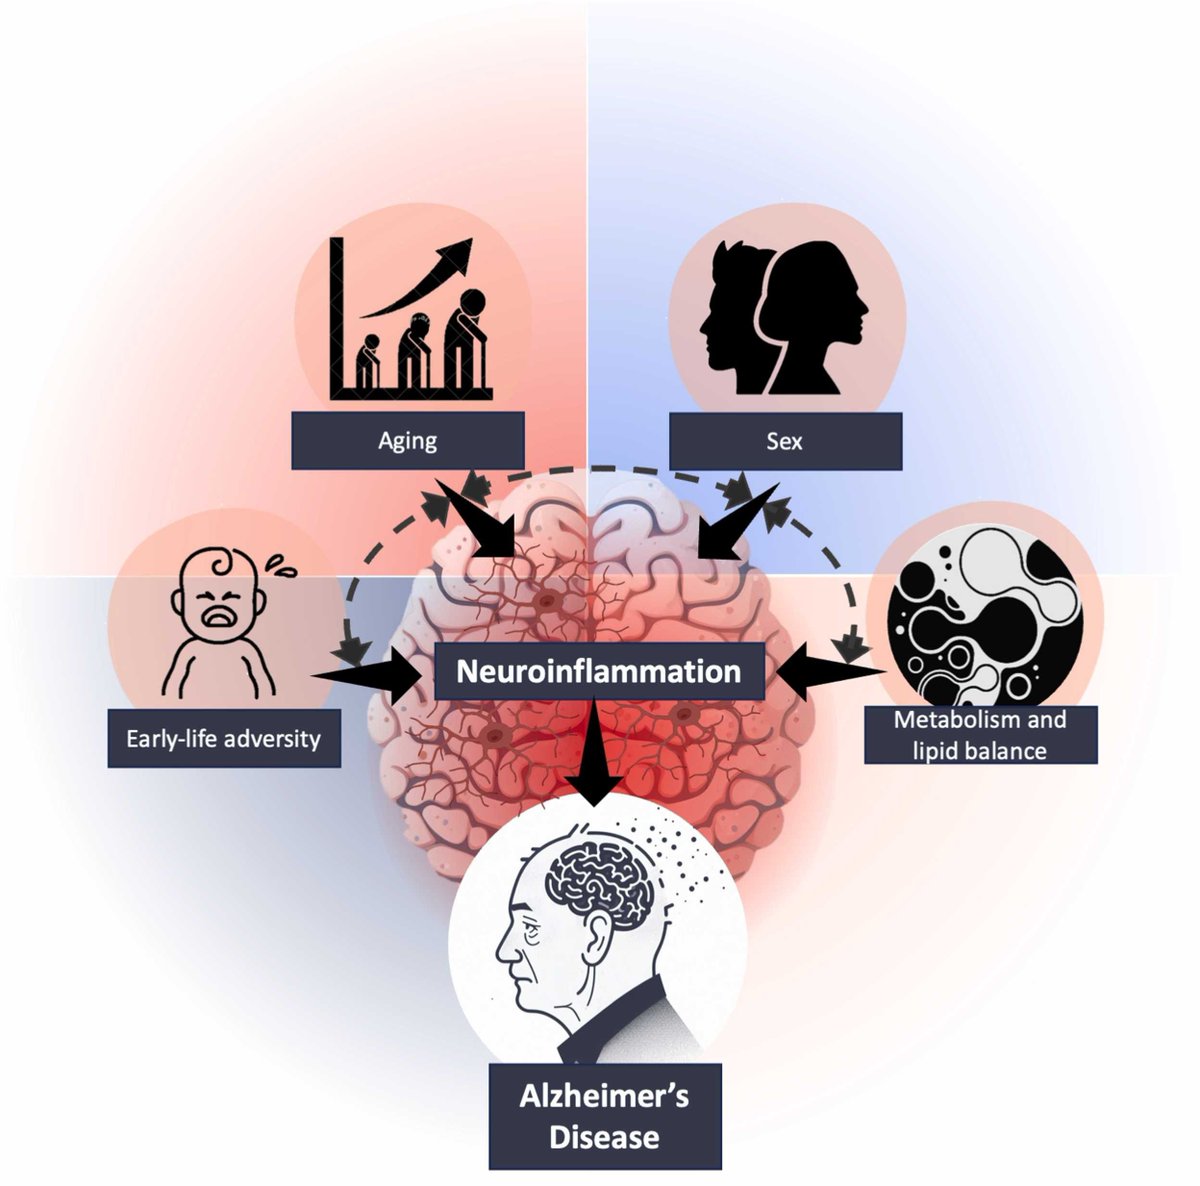 We discuss importance of appropriate polyunsaturated fatty acids (PUFA) in the diet for the #metabolism of specialised pro-resolving mediators (SPMs); raising the possibility for dietary strategies to improve #Alzheimer’s disease outlook.
sciencedirect.com/science/articl…